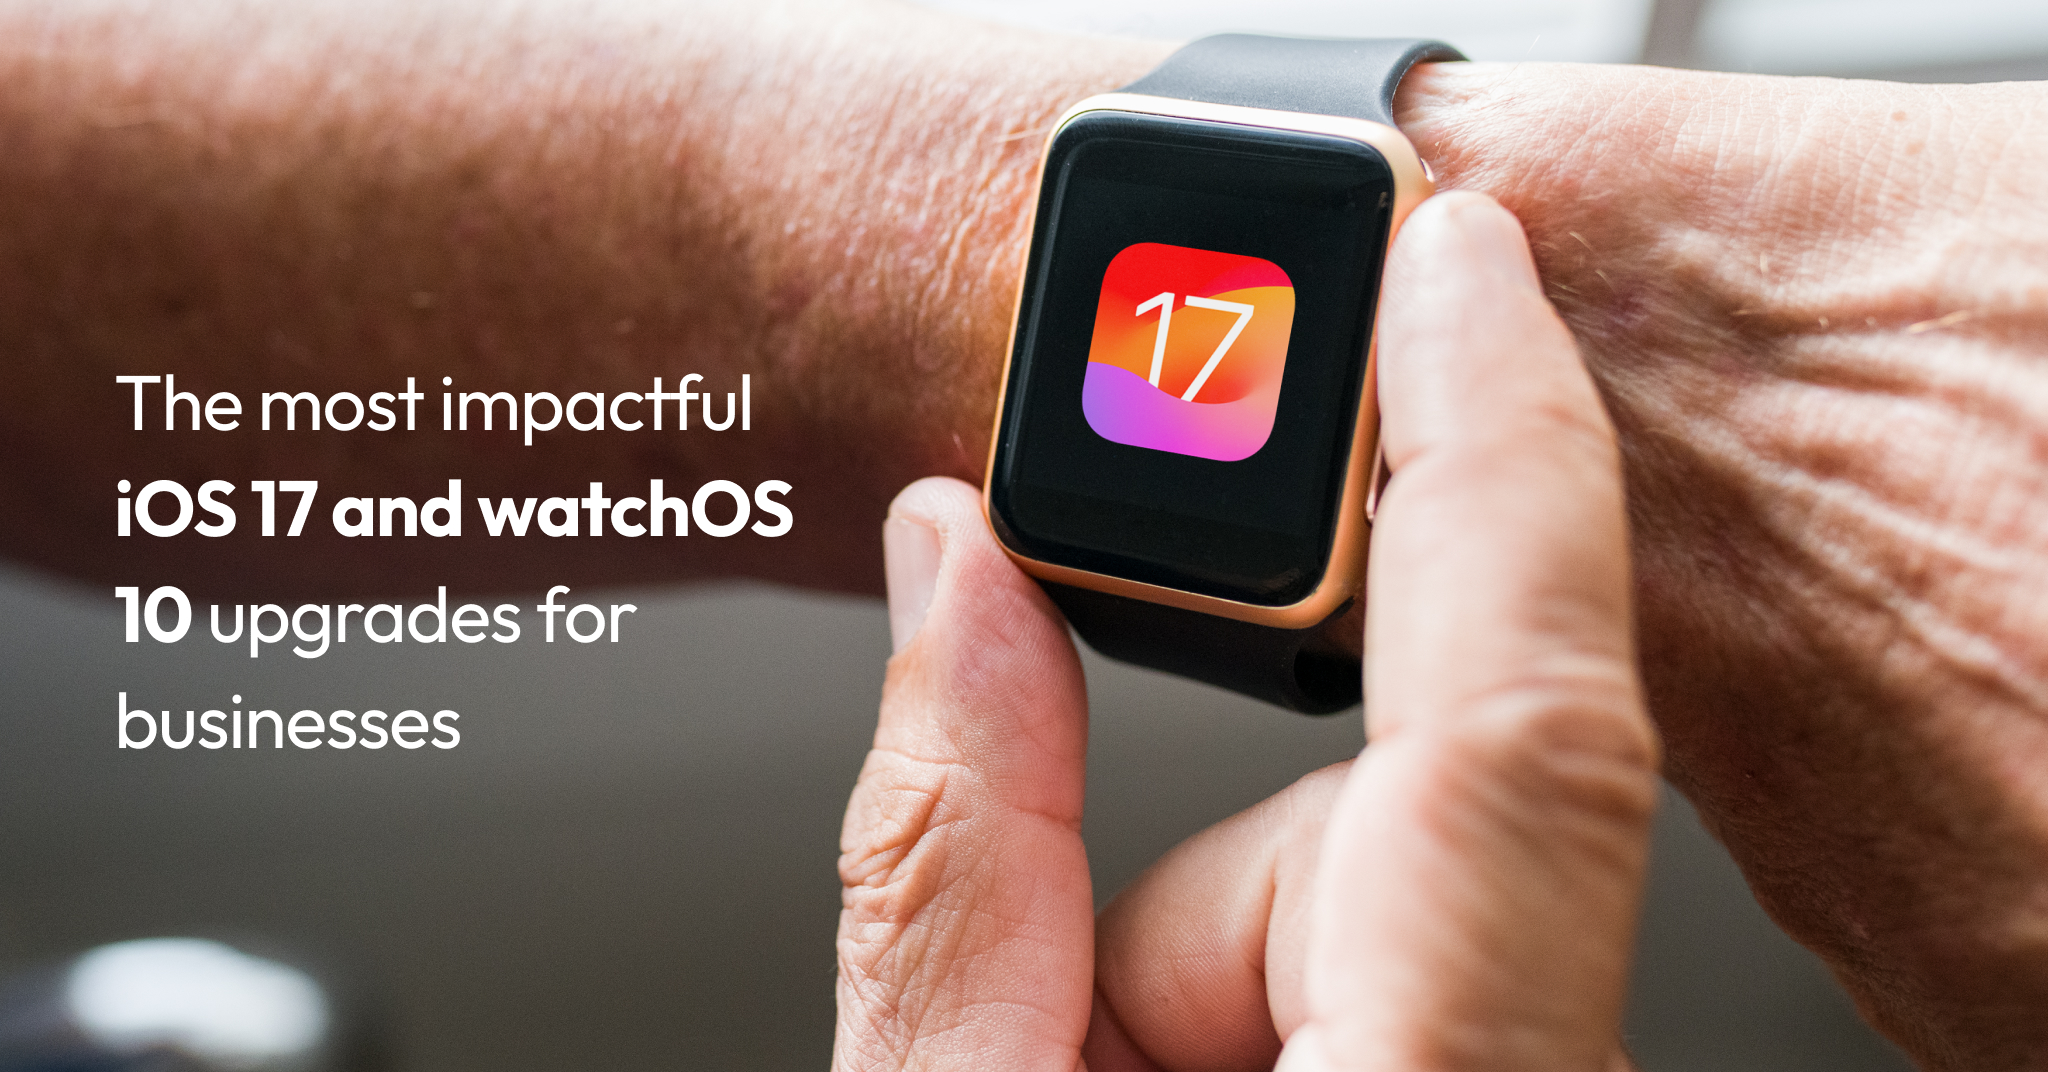 iOS 17 and watchOS 10 upgrades for businesses 